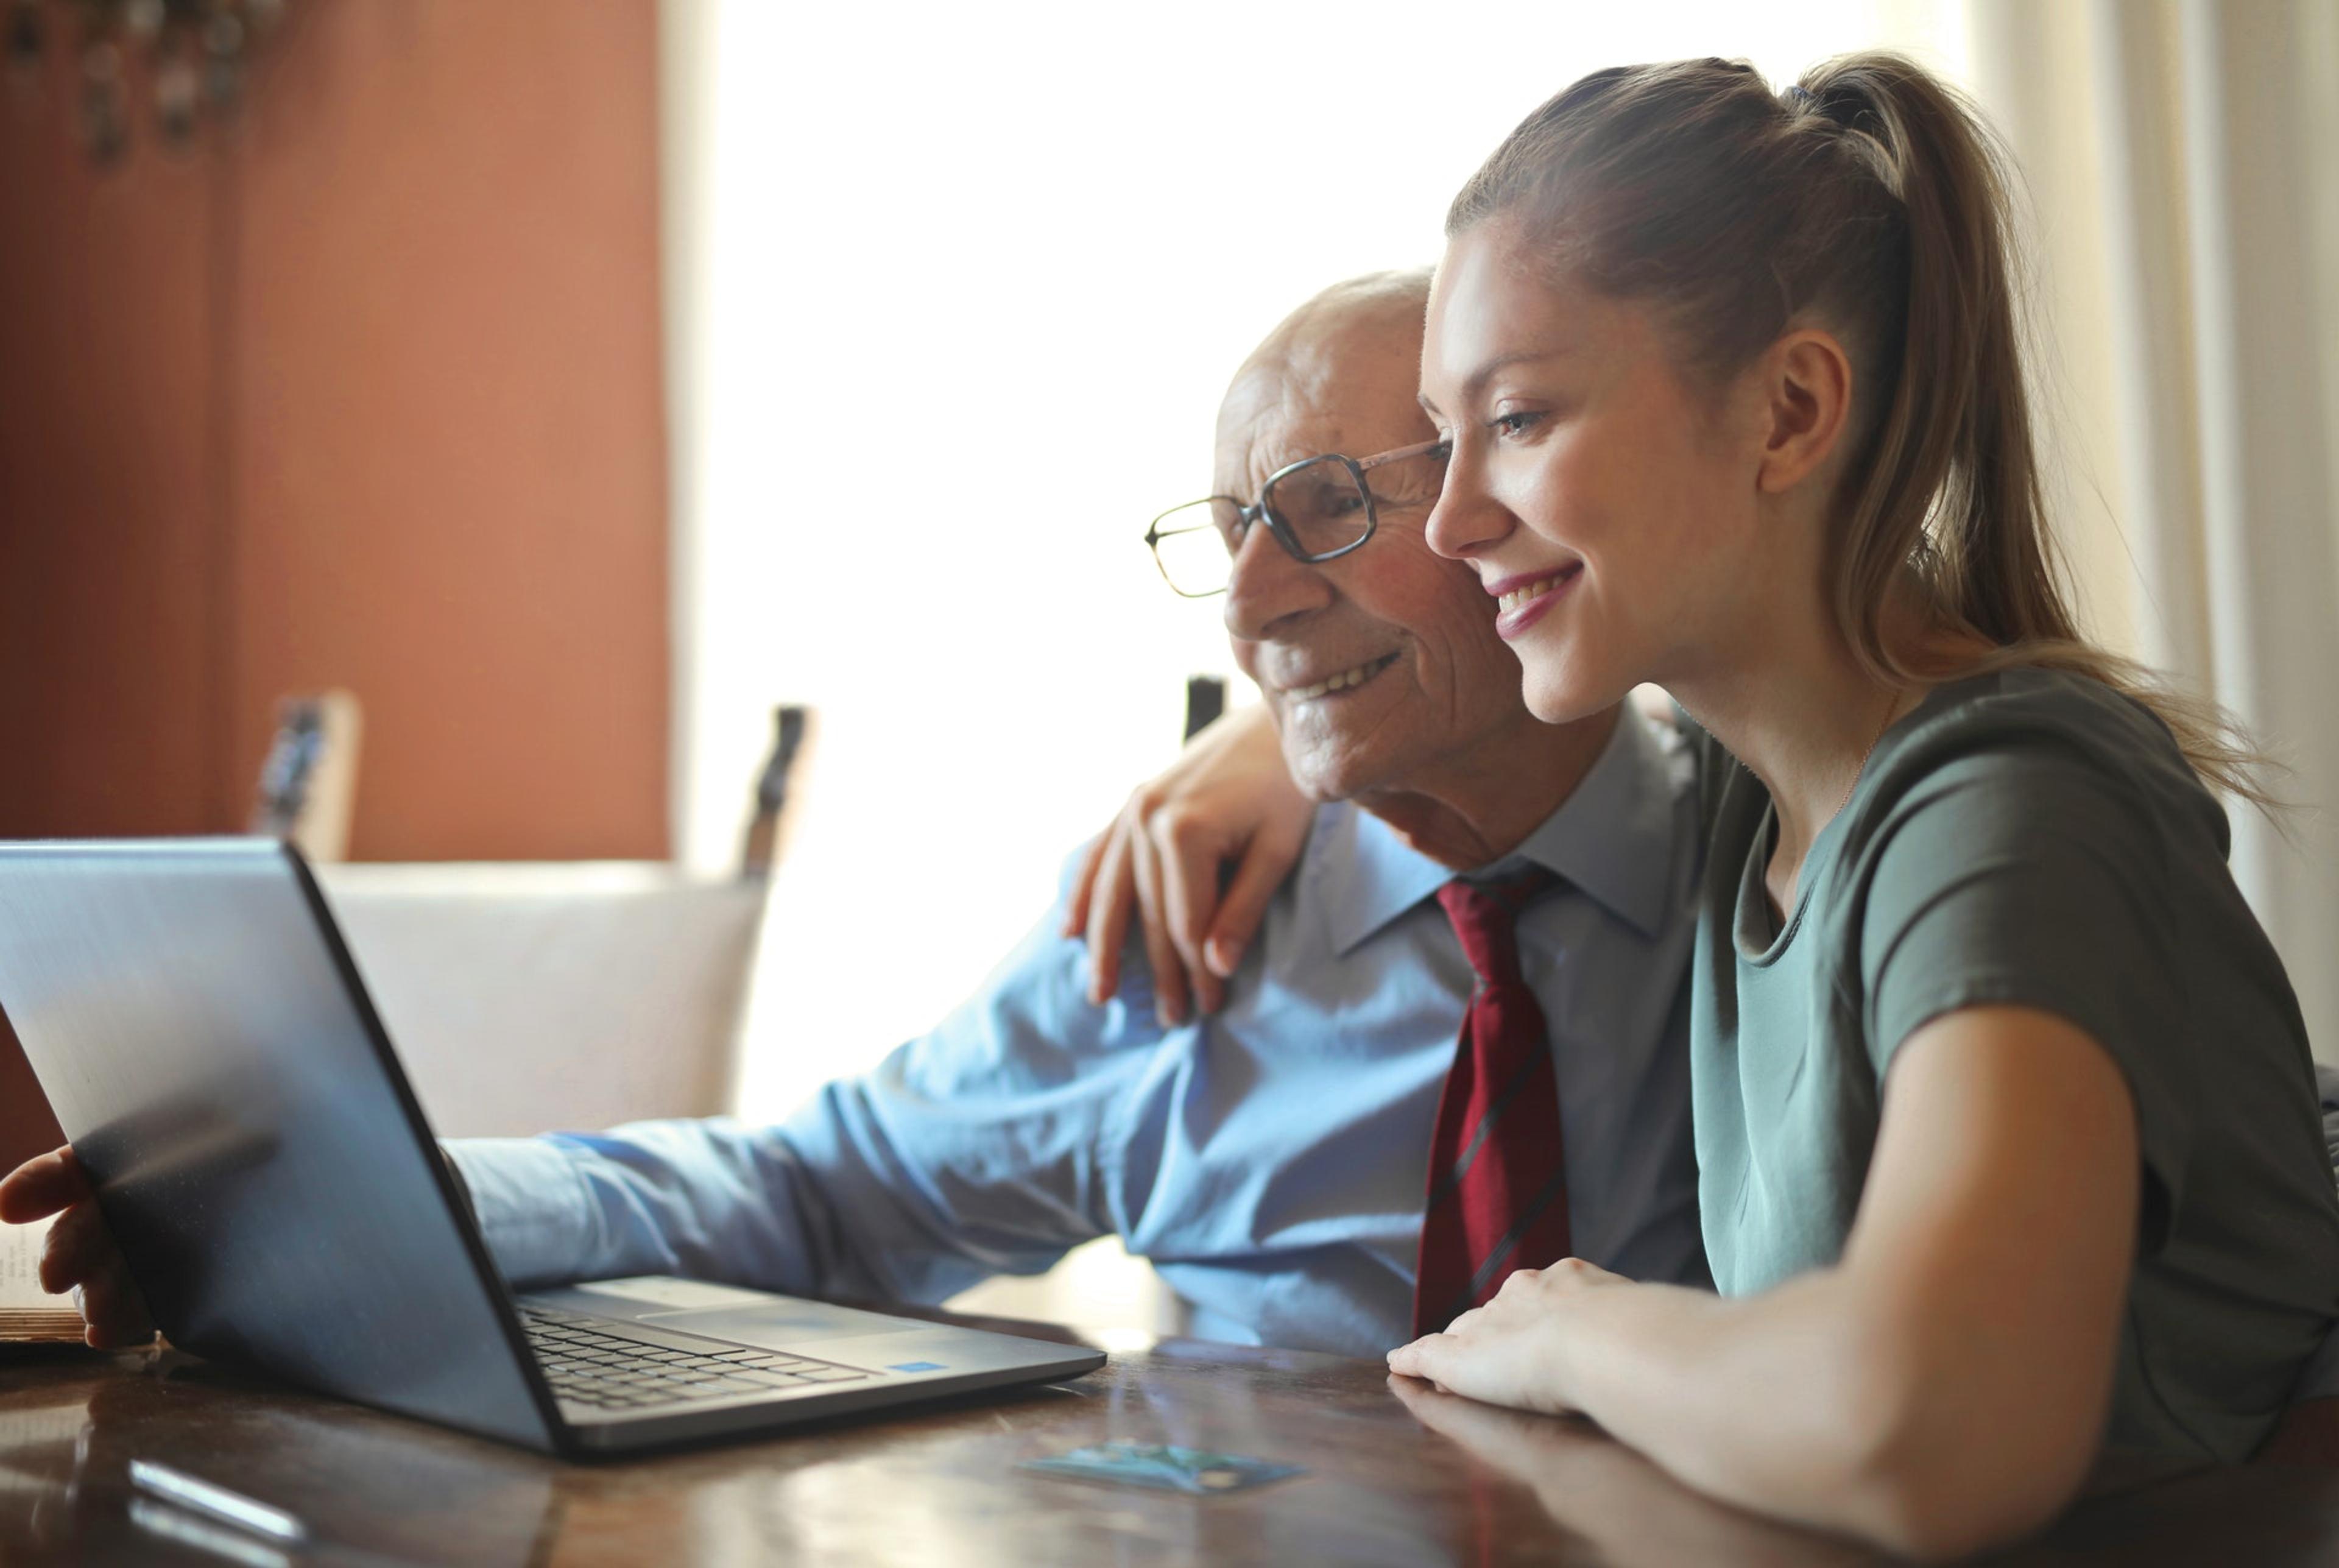 A young woman sits with an older man looking at a laptop, both smiling